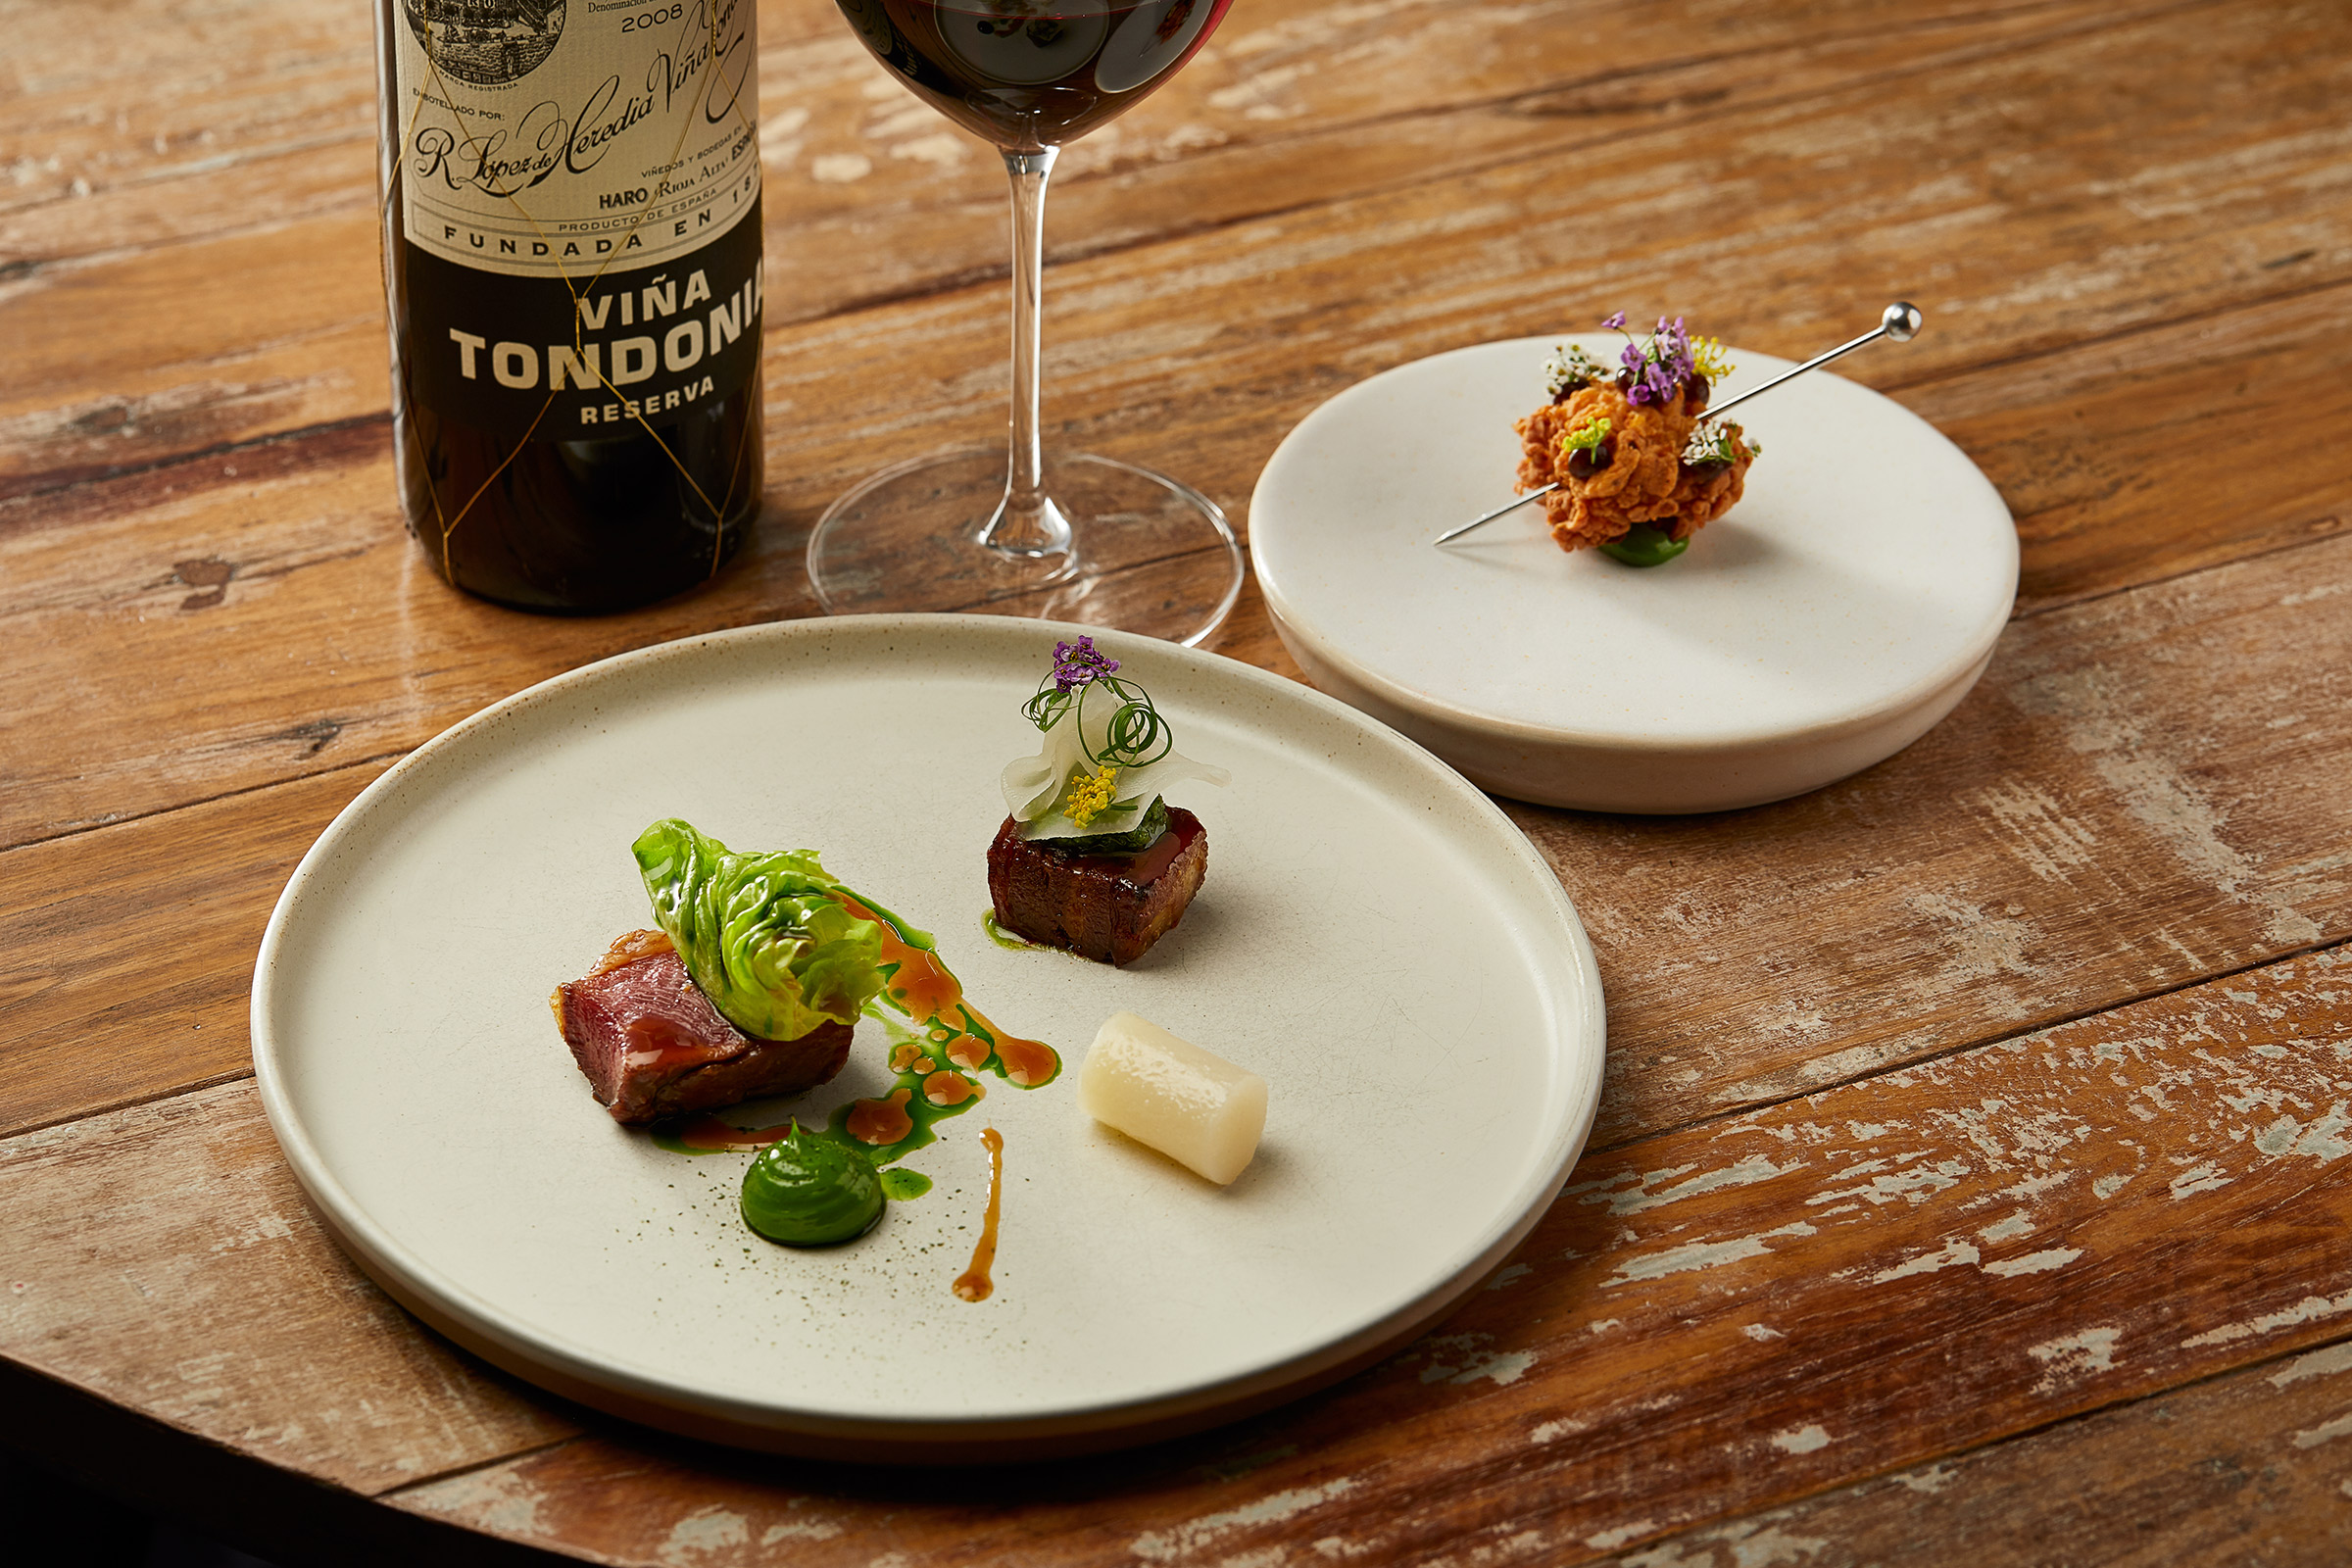 Hogget,  Vina Tondonia, Aizle, Restaurant food and drink photography Alastair Ferrier.